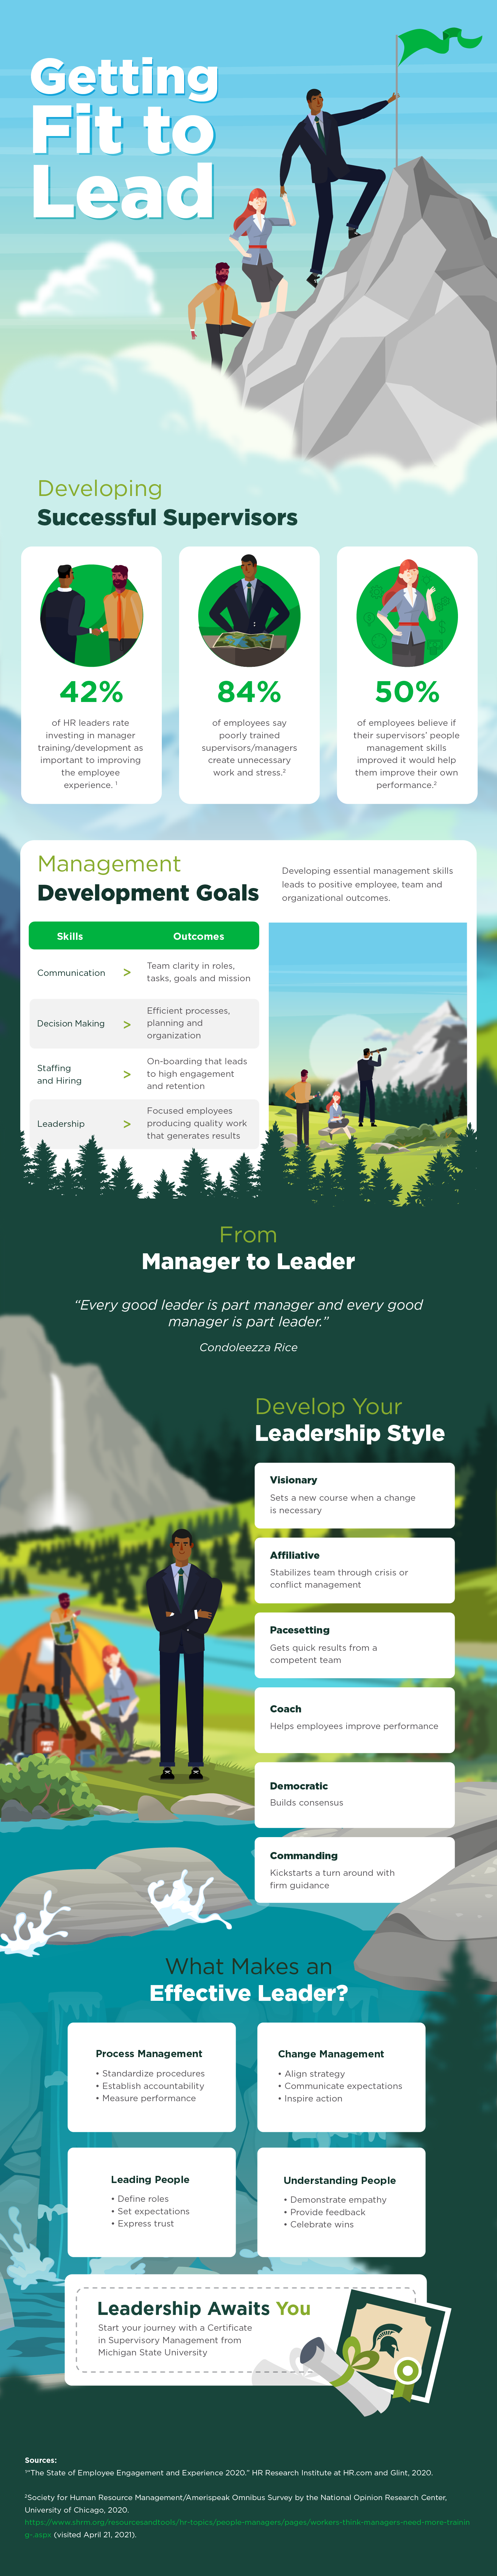 Getting fit to lead infographic; developing successful leaders; management development goals; from manager to leader; develop your leadership style; what makes an effective leader?; leadership awaits you; start your journey with a Certificate in Supervisory Management from Michigan State University